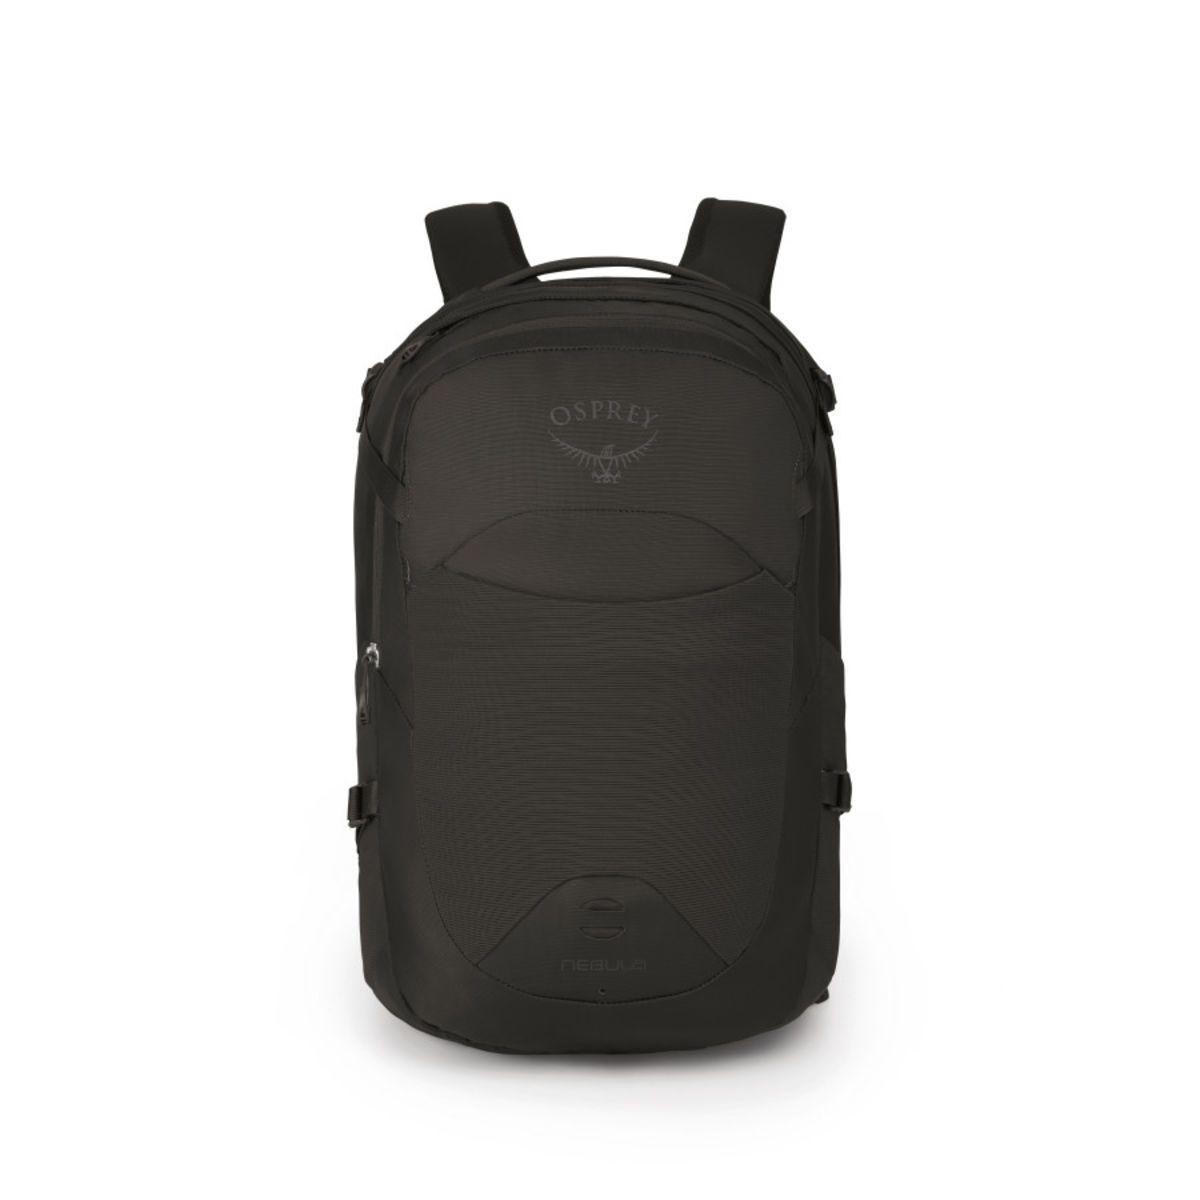 Osprey Ozone Duplex 60 Review  MUST READ Review